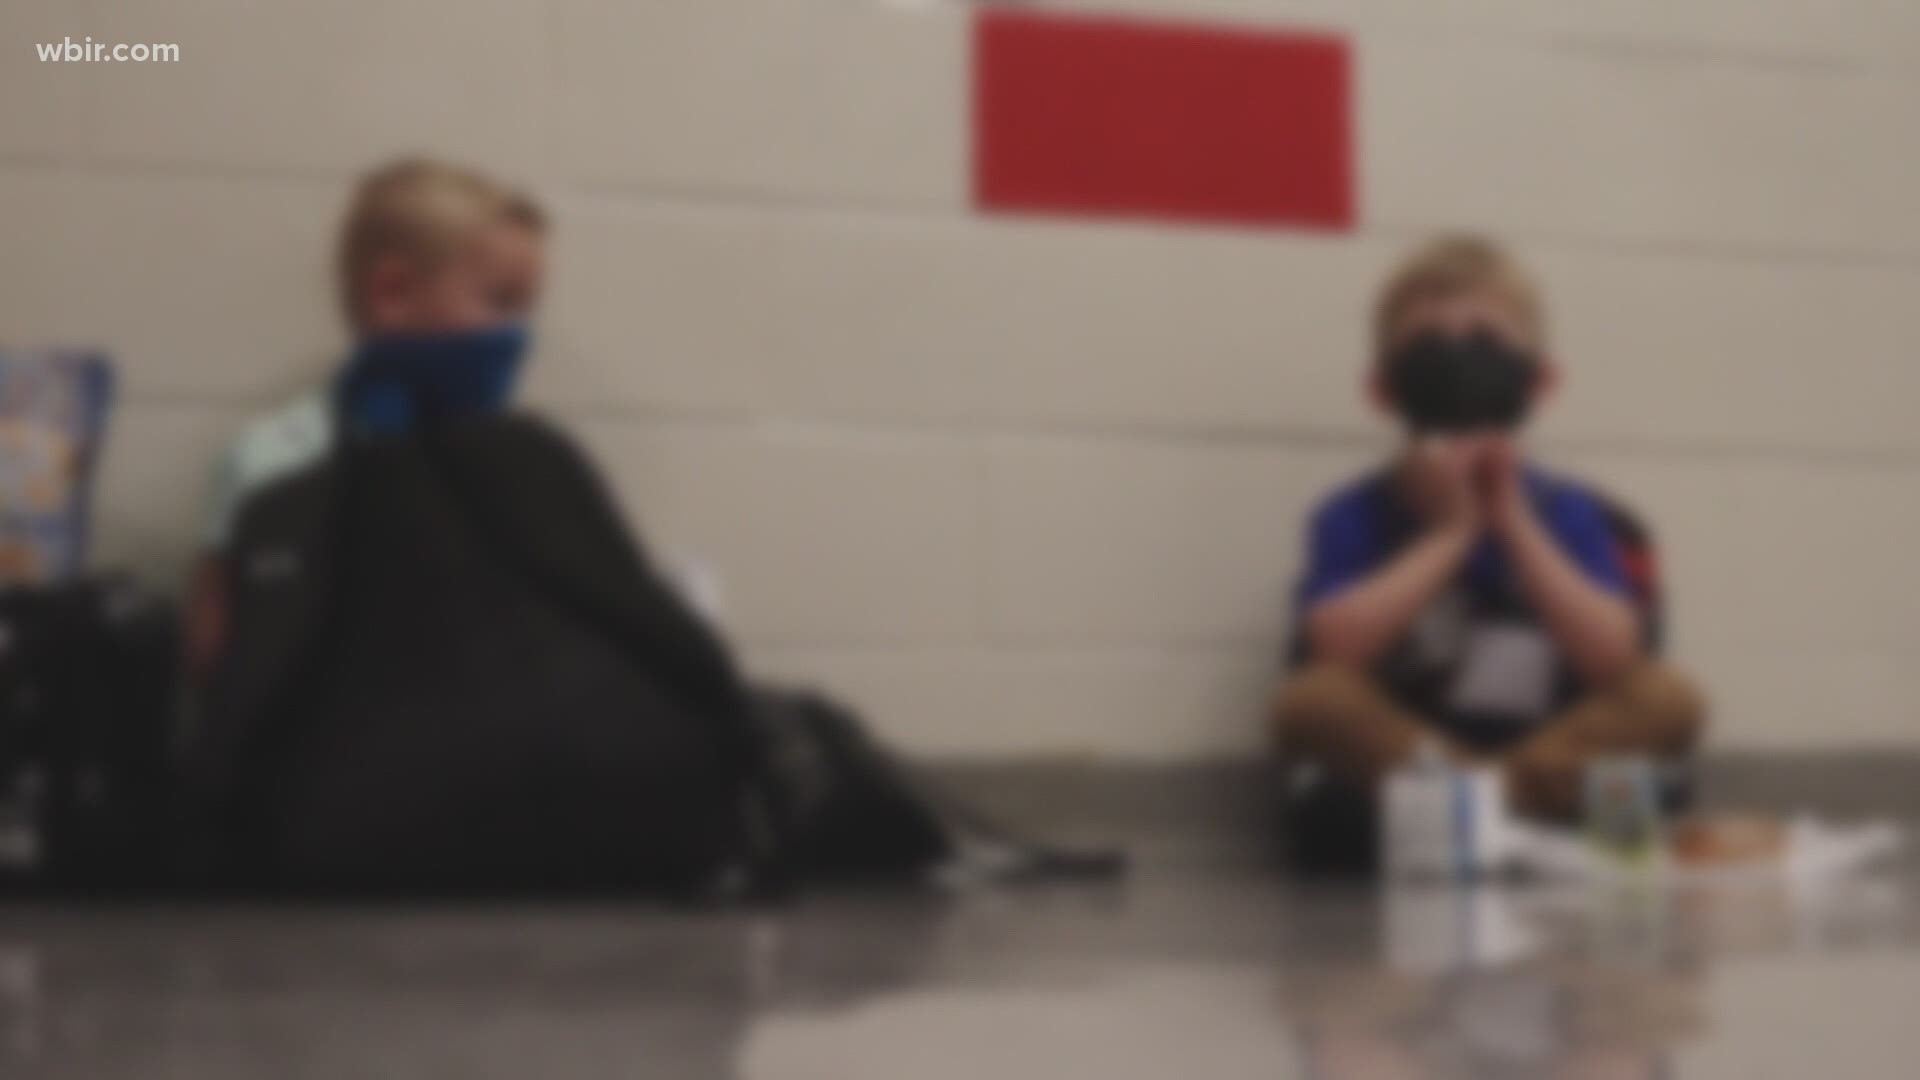 School districts across East Tennessee are deciding now — should masks be required in school?